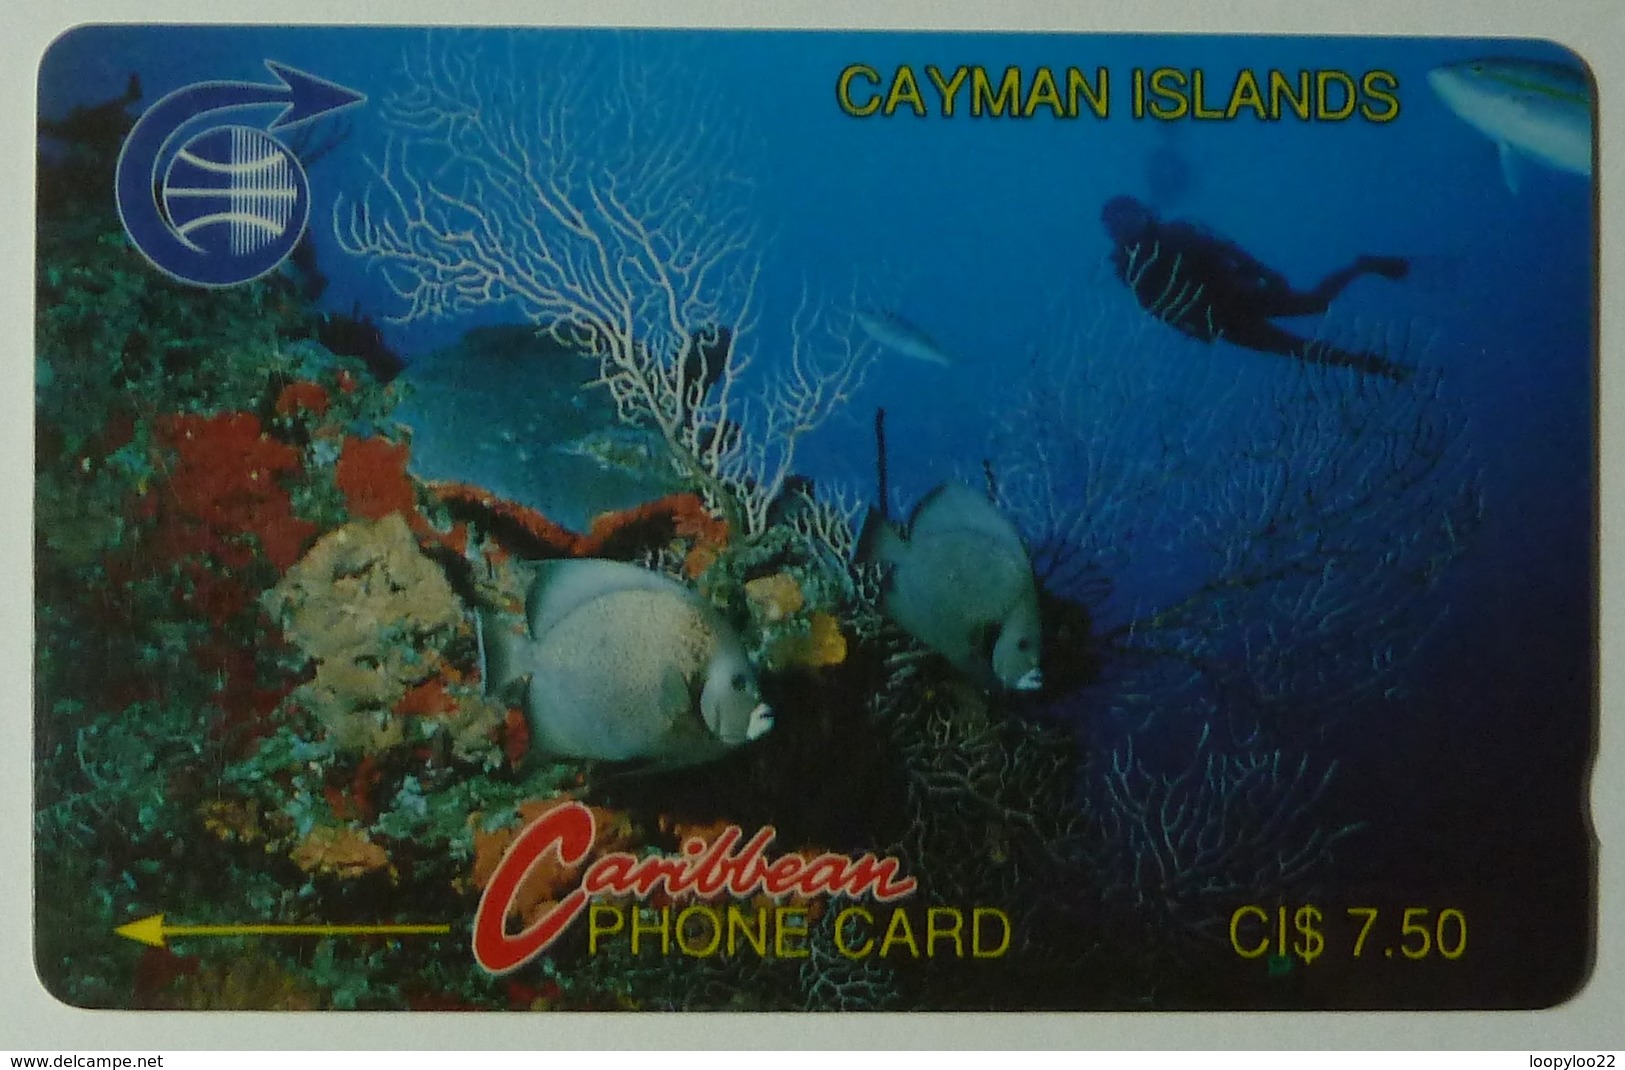 CAYMAN ISLANDS - GPT - CAY-3A - Underwater - Diver - 3CCIA - $7.50 - RARE BLACK REVERSE - Used - Kaimaninseln (Cayman I.)